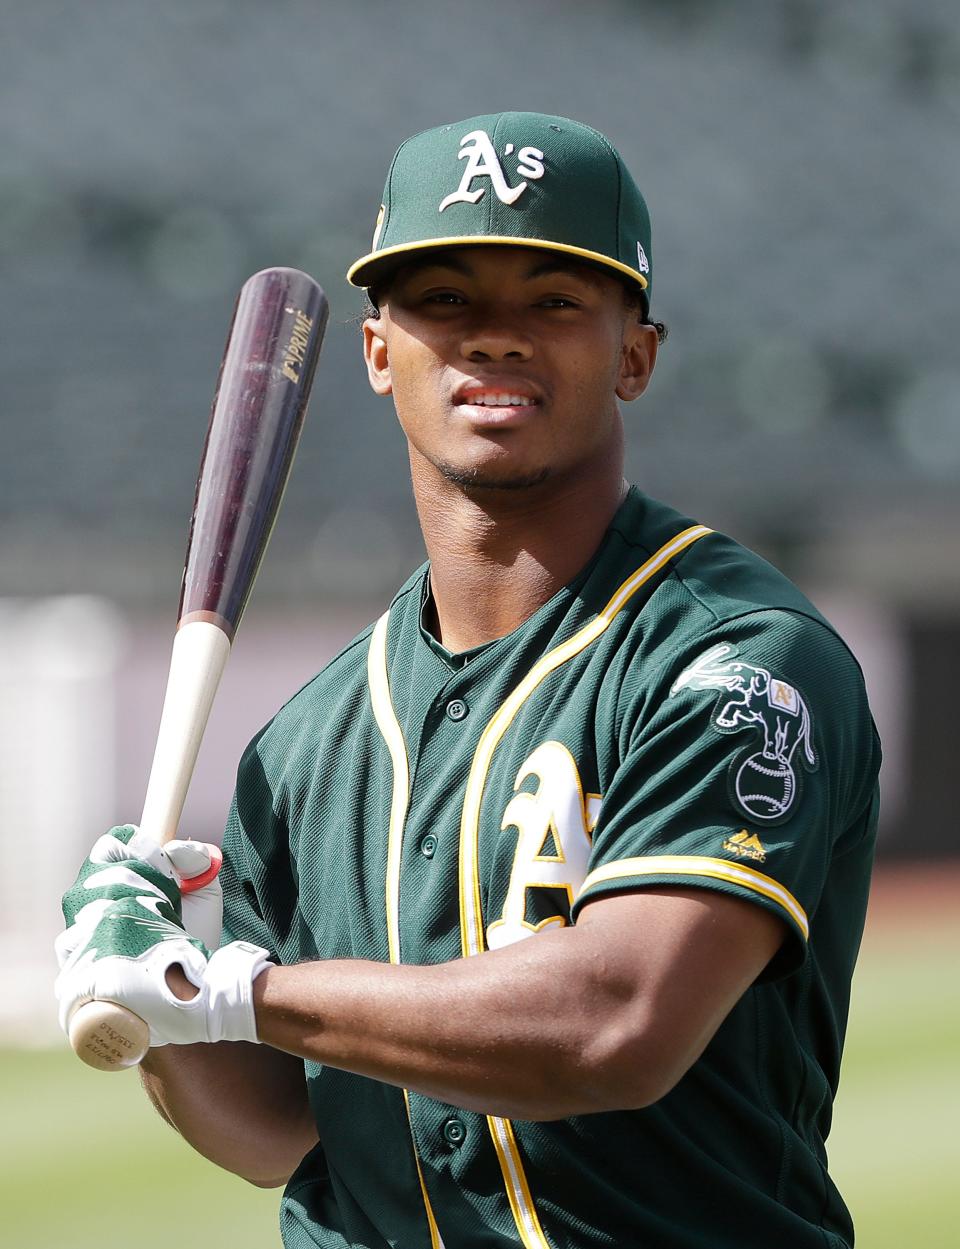 Kyler Murray waits to hit during batting practice before an Oakland A's baseball game against the Los Angeles Angels on  June 15, 2018.